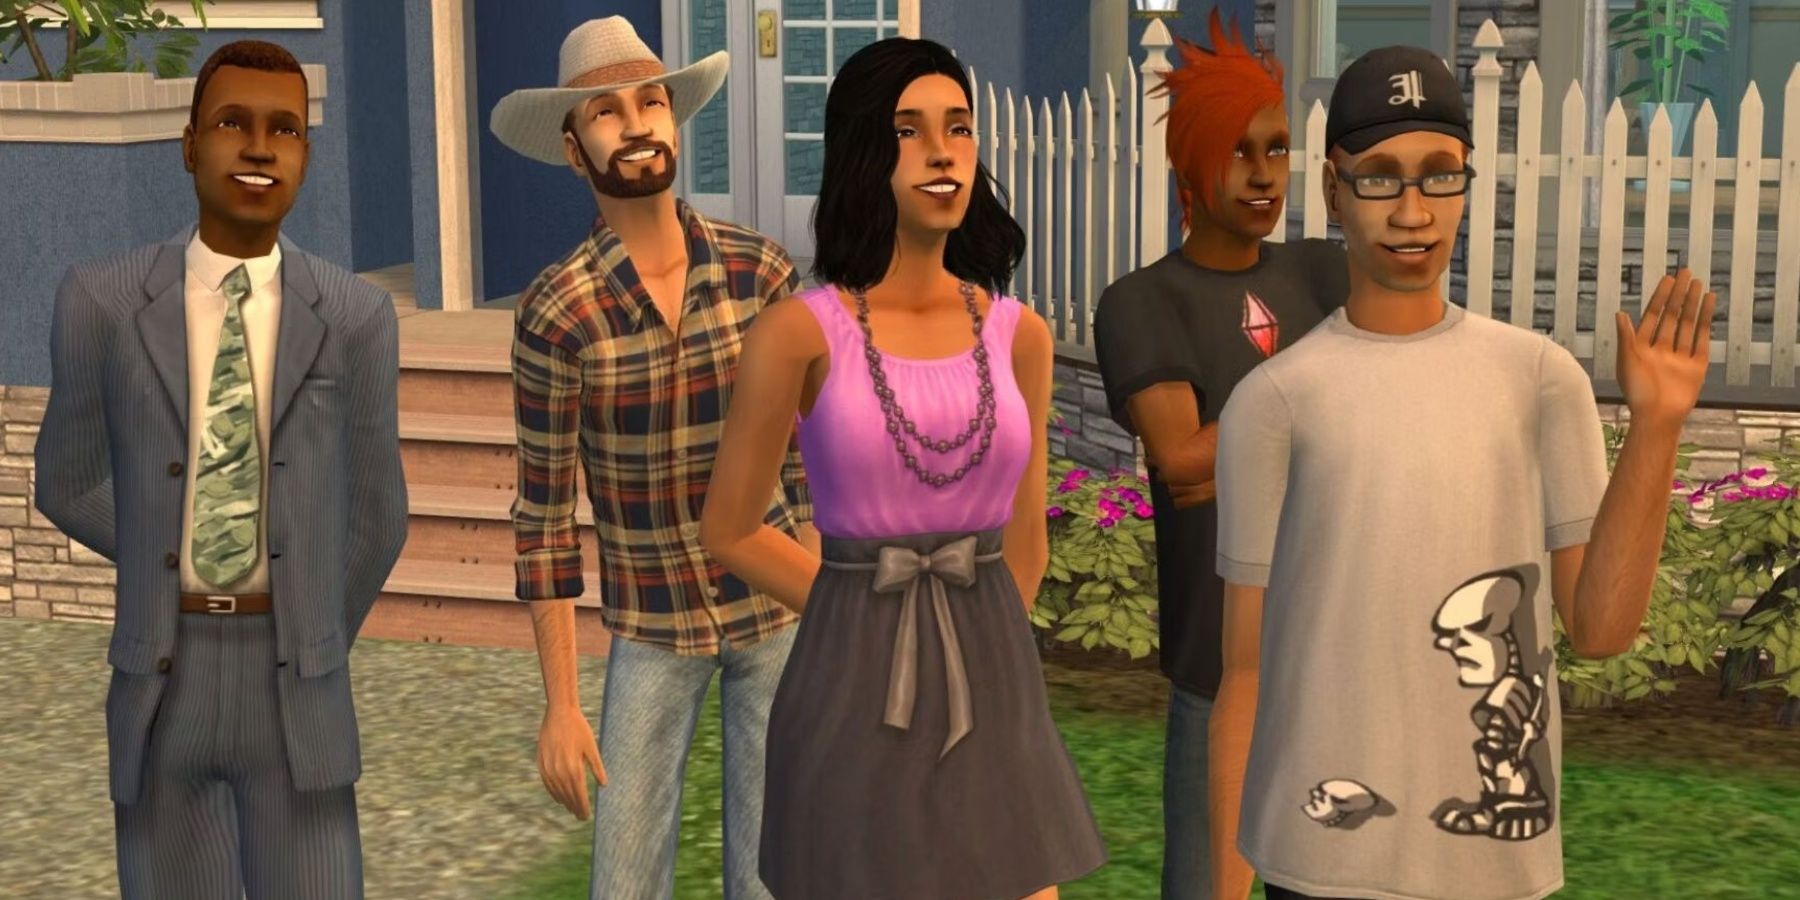 Sims Fan Discovers Hilarious Letter They Wrote To Their Mom